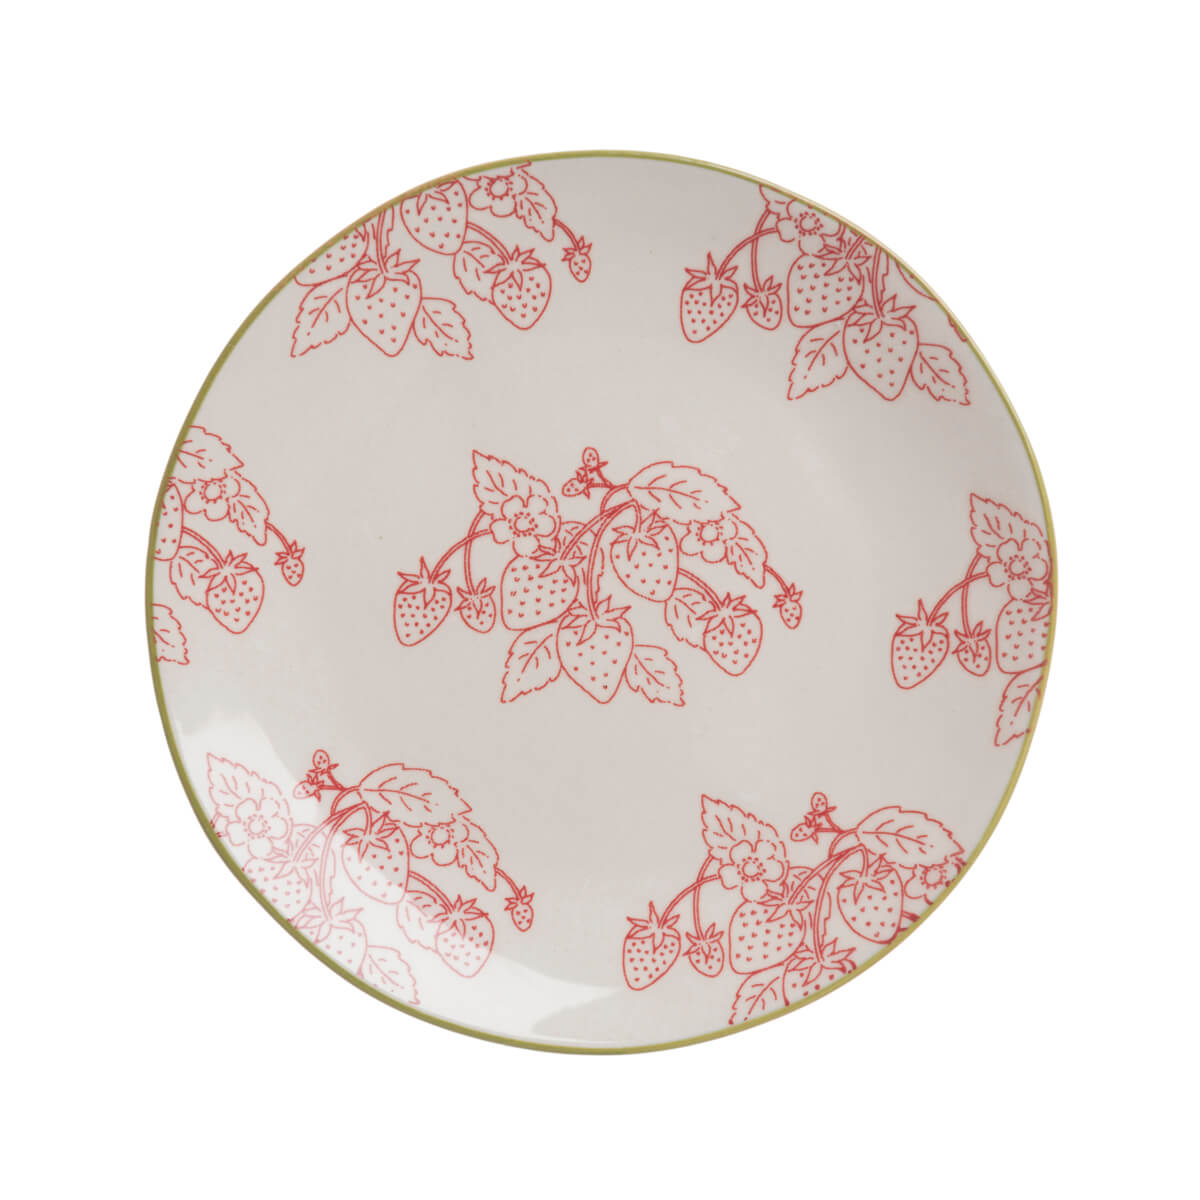 White side plate made from stoneware featuring Sophie Allport Strawberries Illustrations